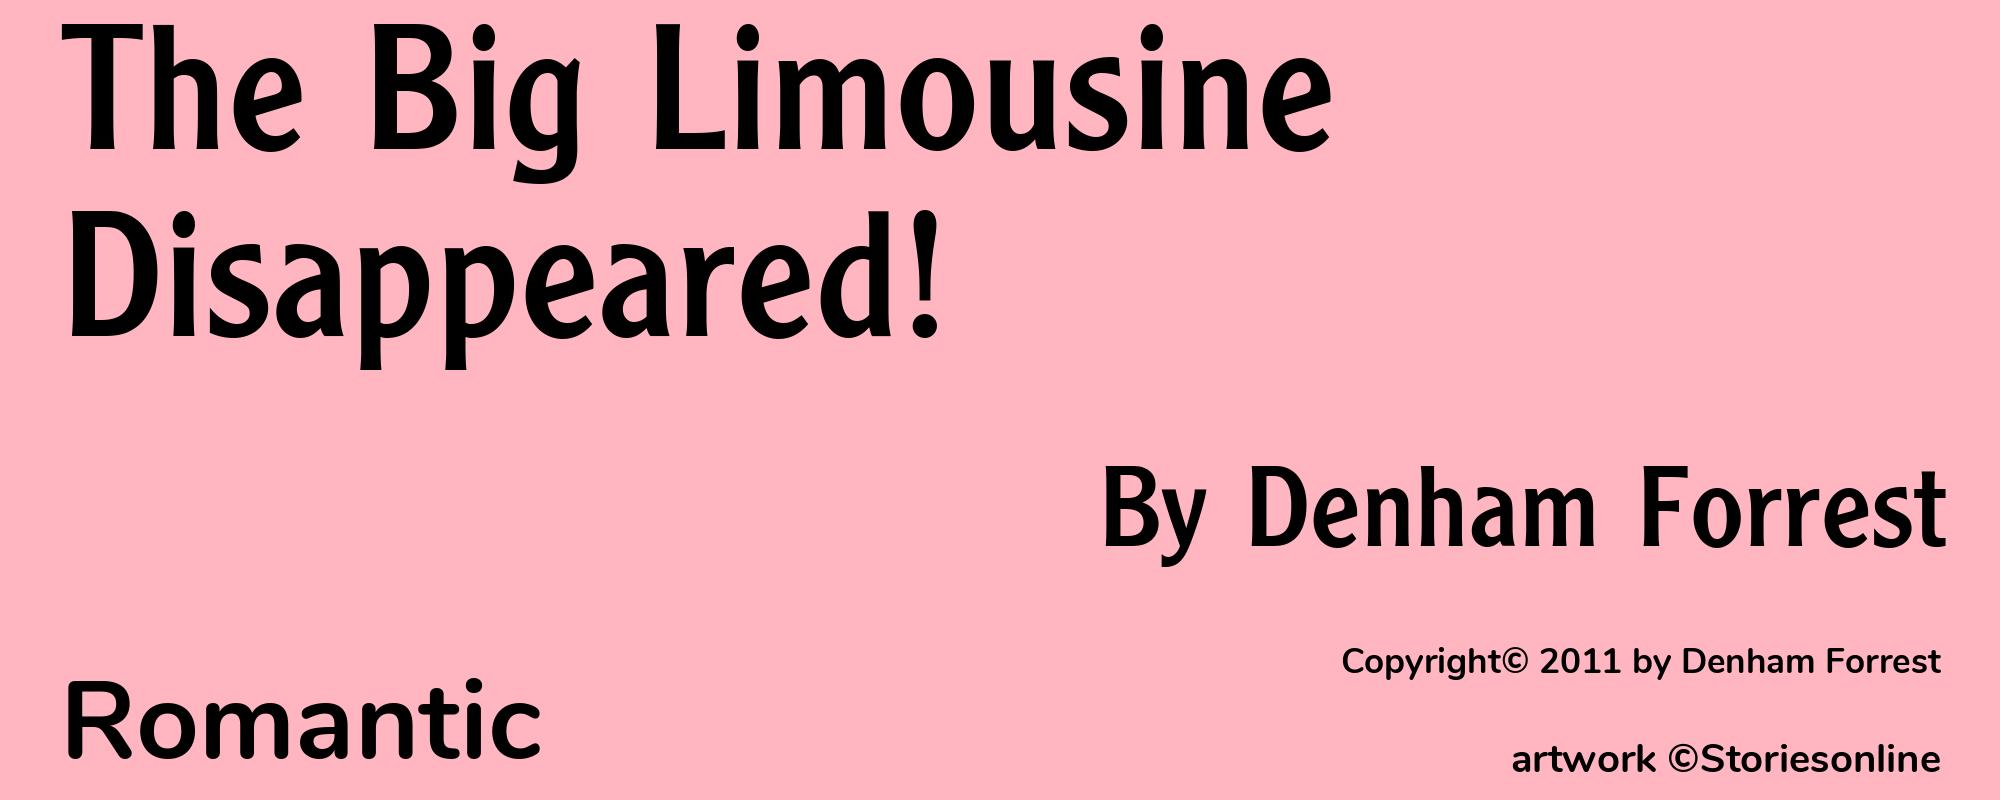 The Big Limousine Disappeared! - Cover